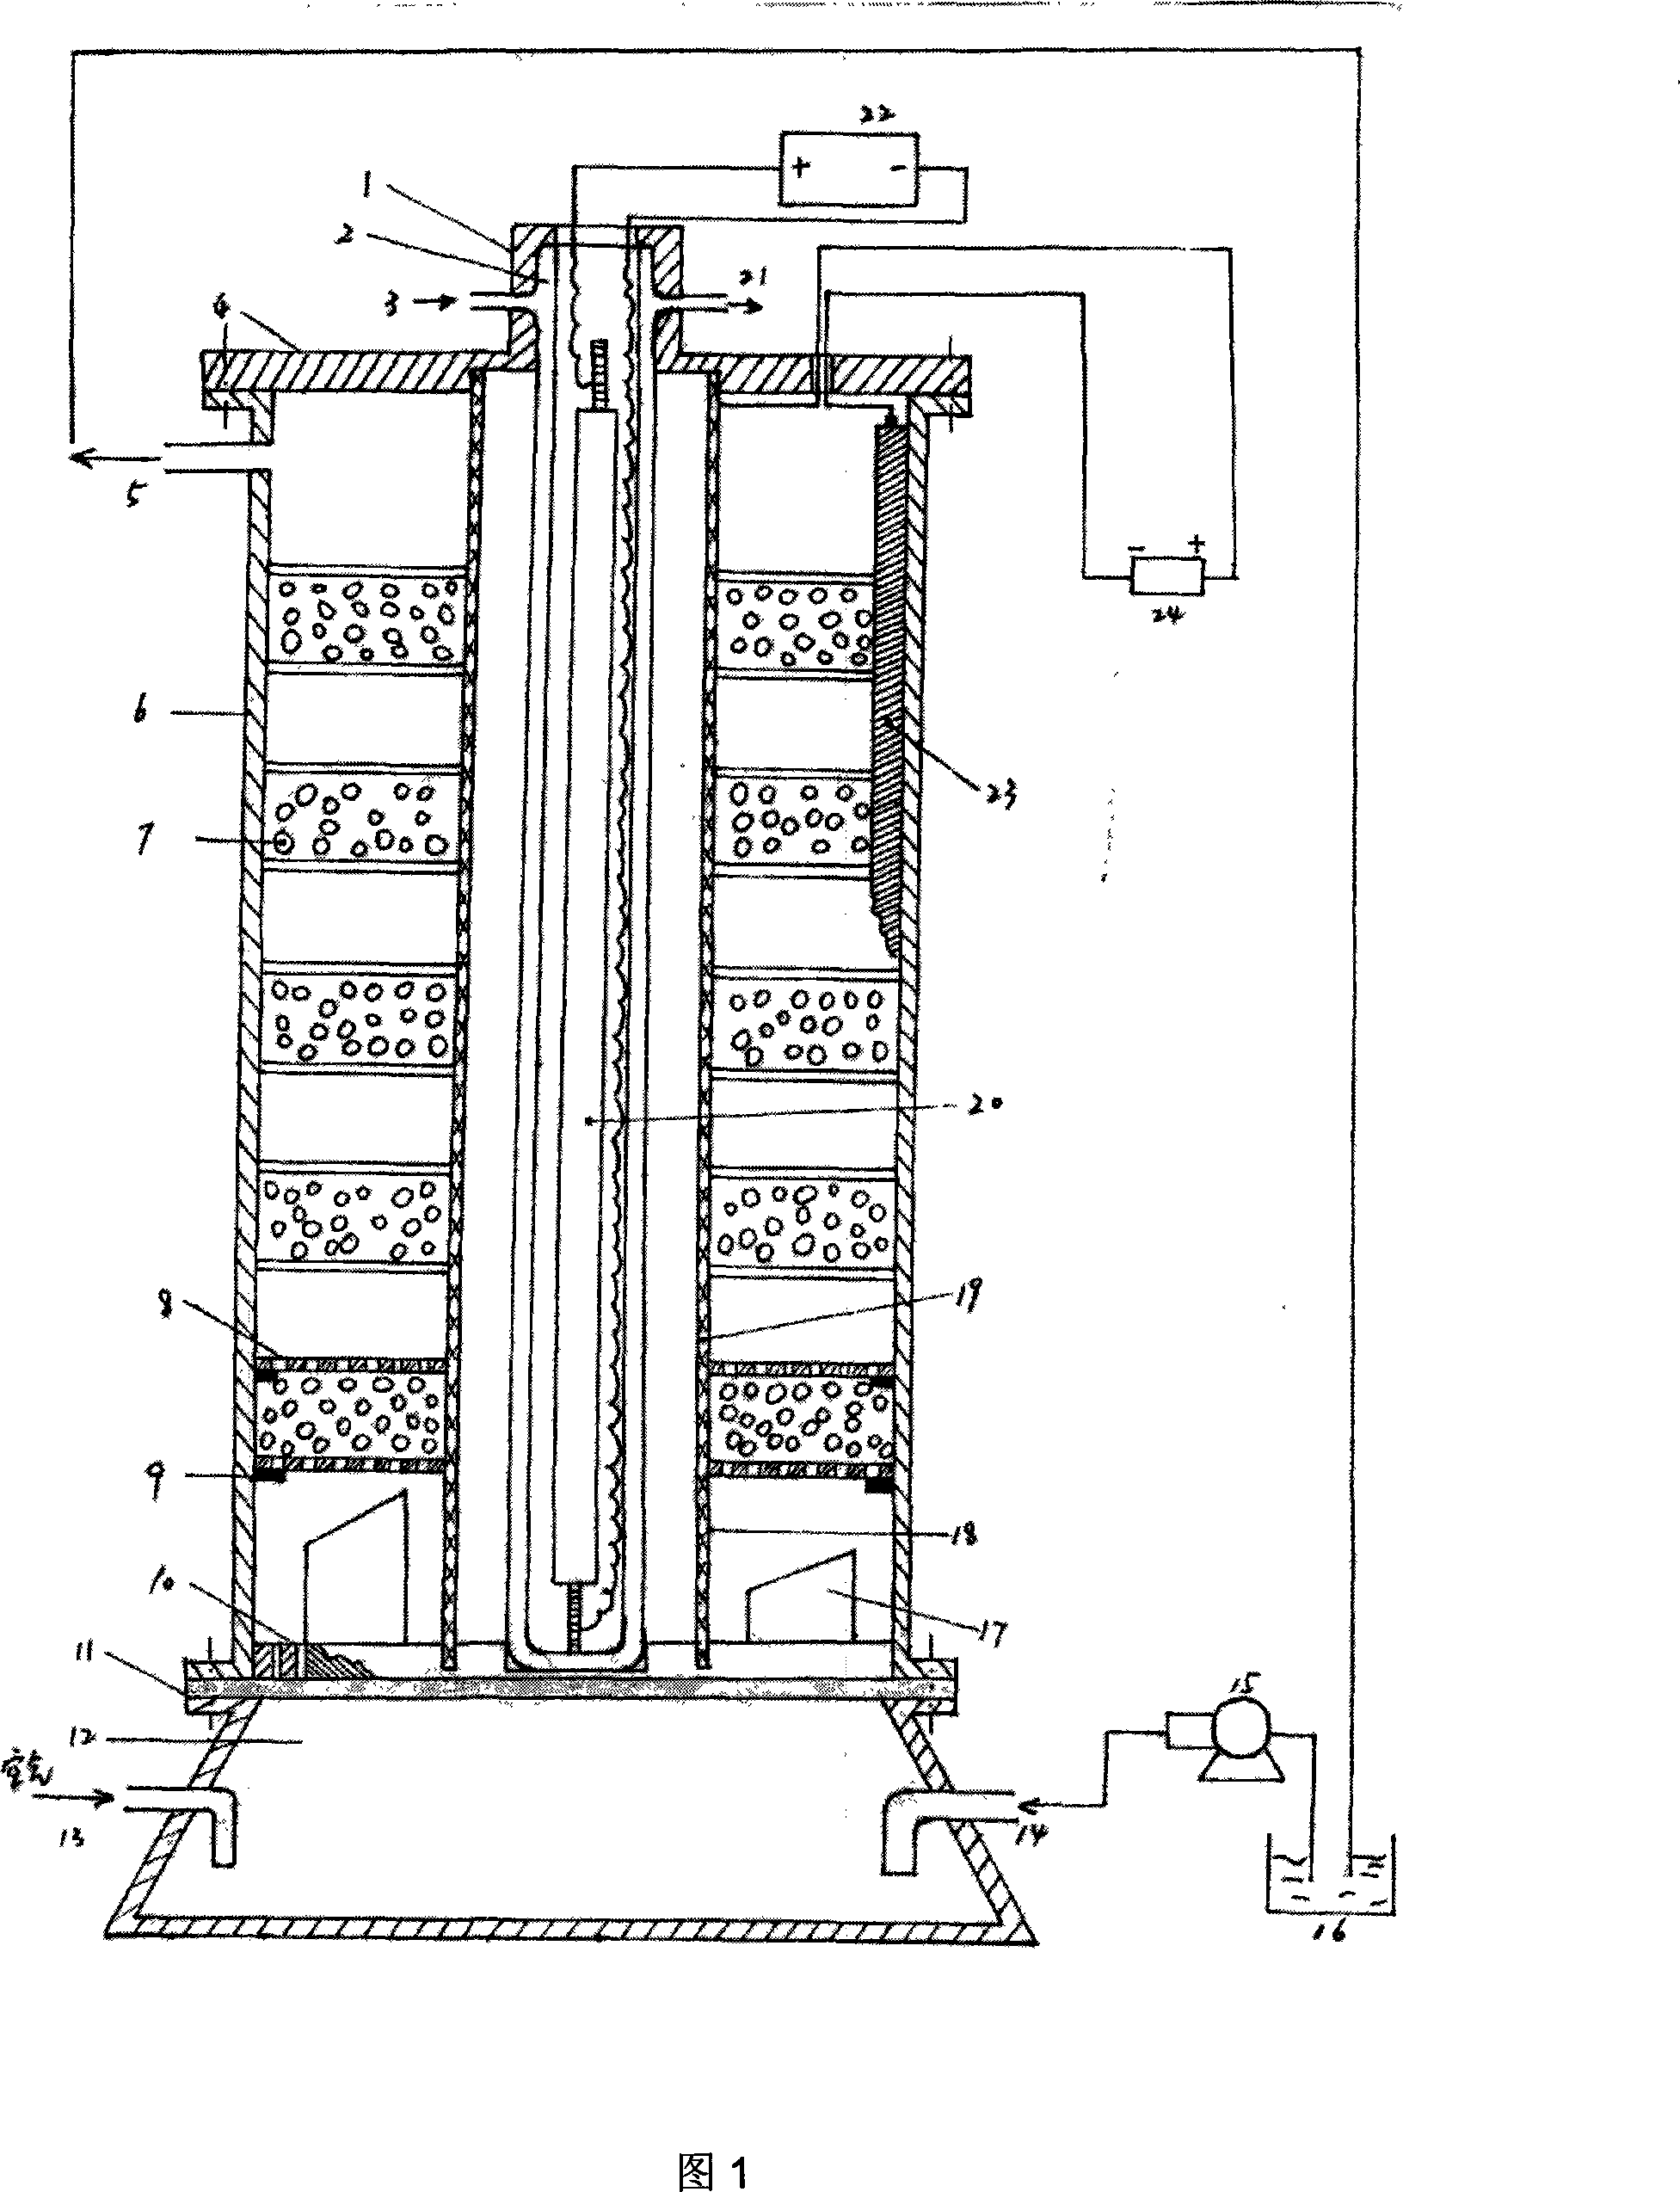 Fixed bed inhomogeneous three dimensional electrode photo electrocatalysis reactor